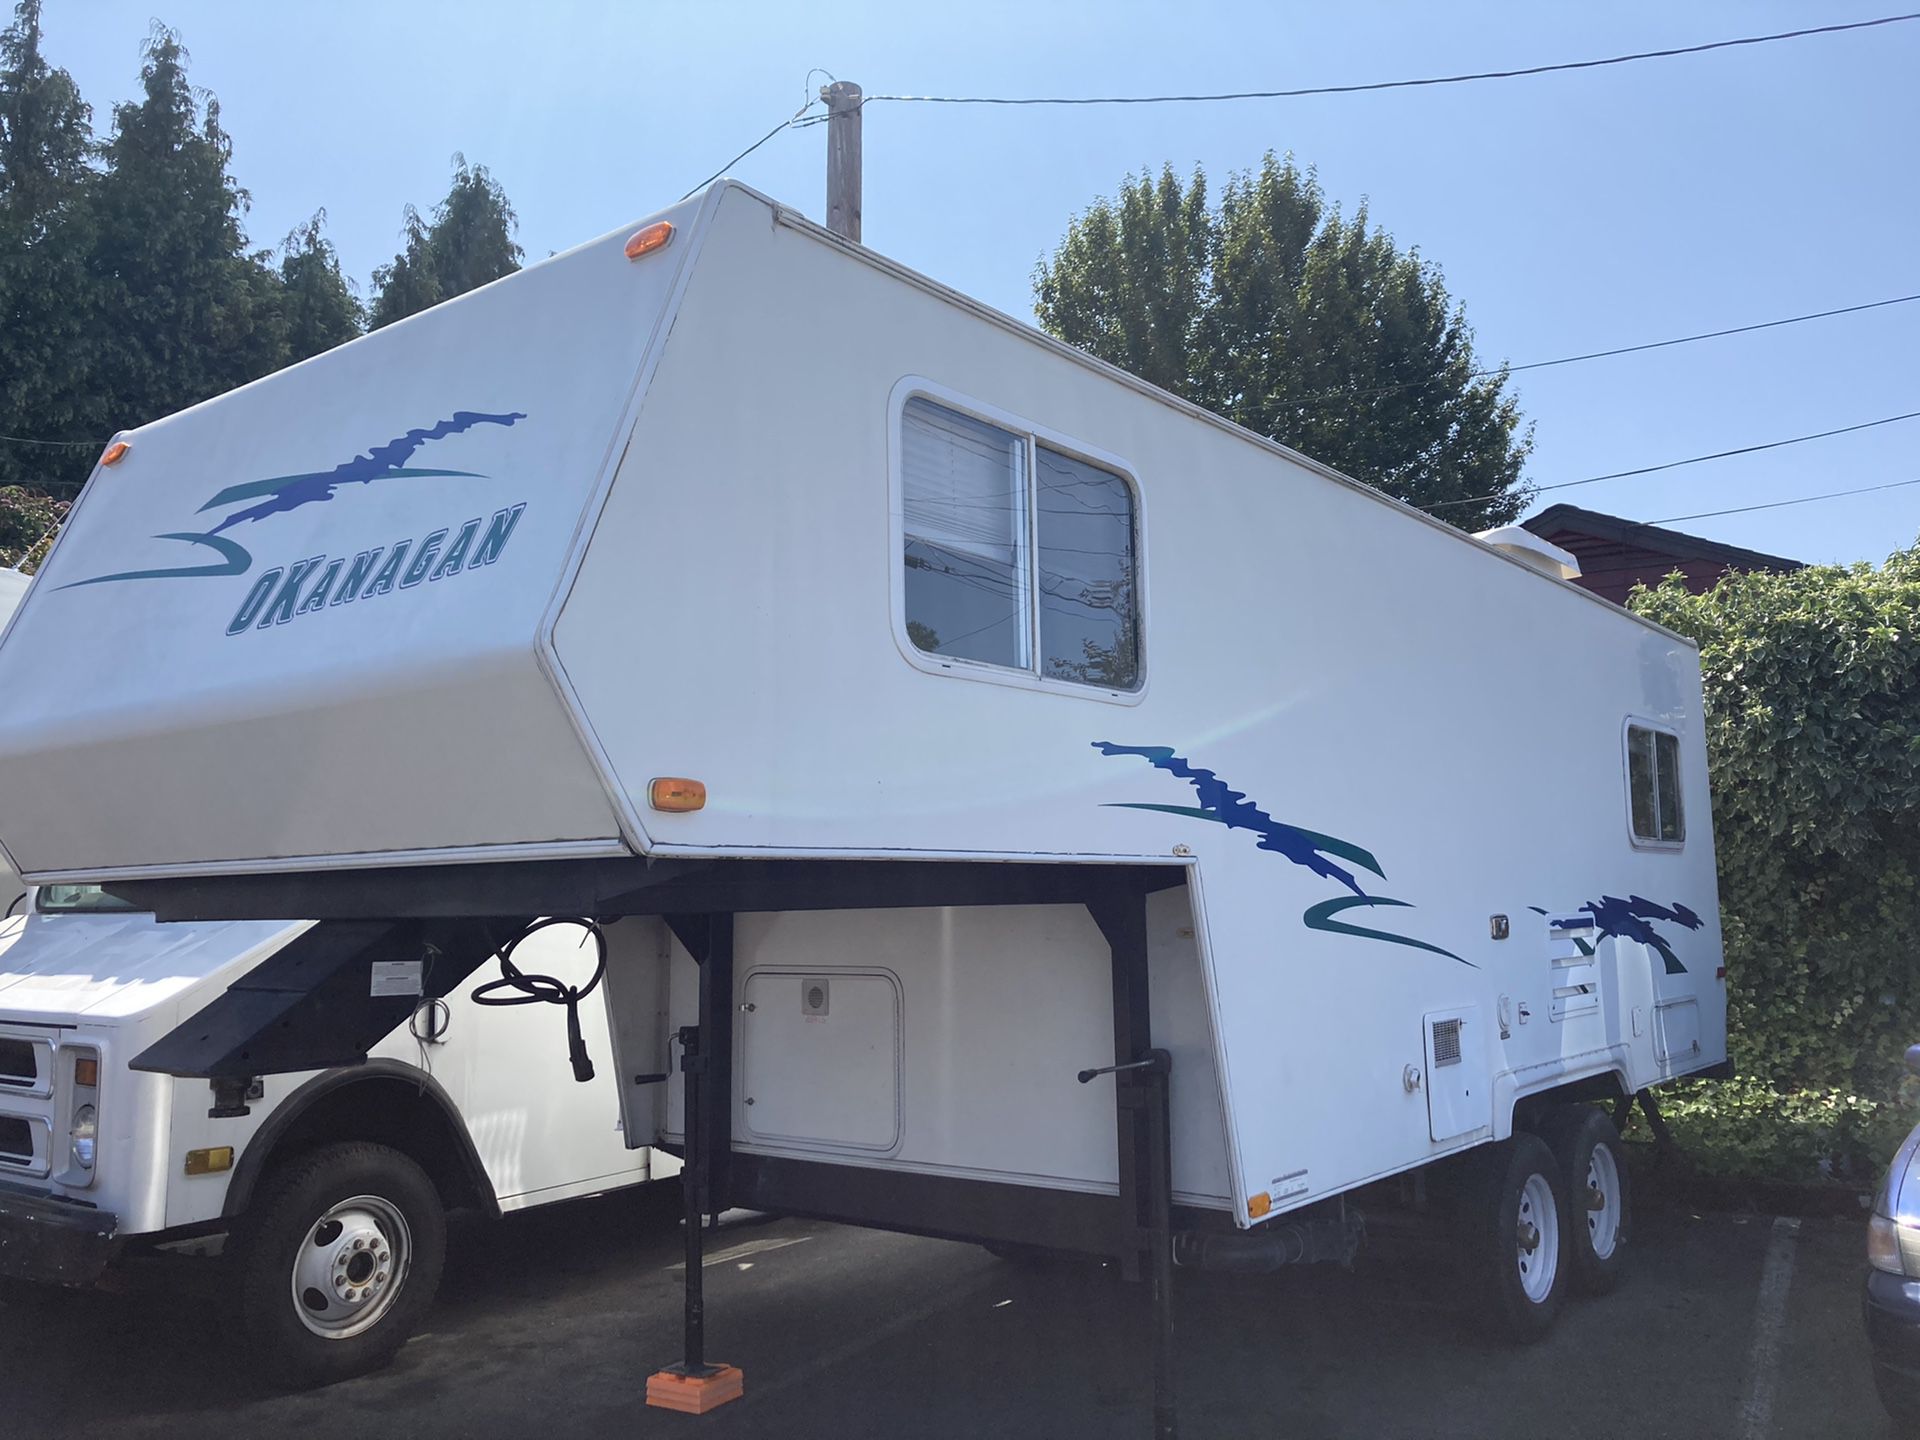 2002 OKANAGAN 26ft LONG FIFTH WHEEL TRAILER like BRAND NEW CONDITION, SUPER CLEAN, EVERYTHING WORKs PERFECT. NO LEAKING. ONLY $4,900 for QUICK SALE.